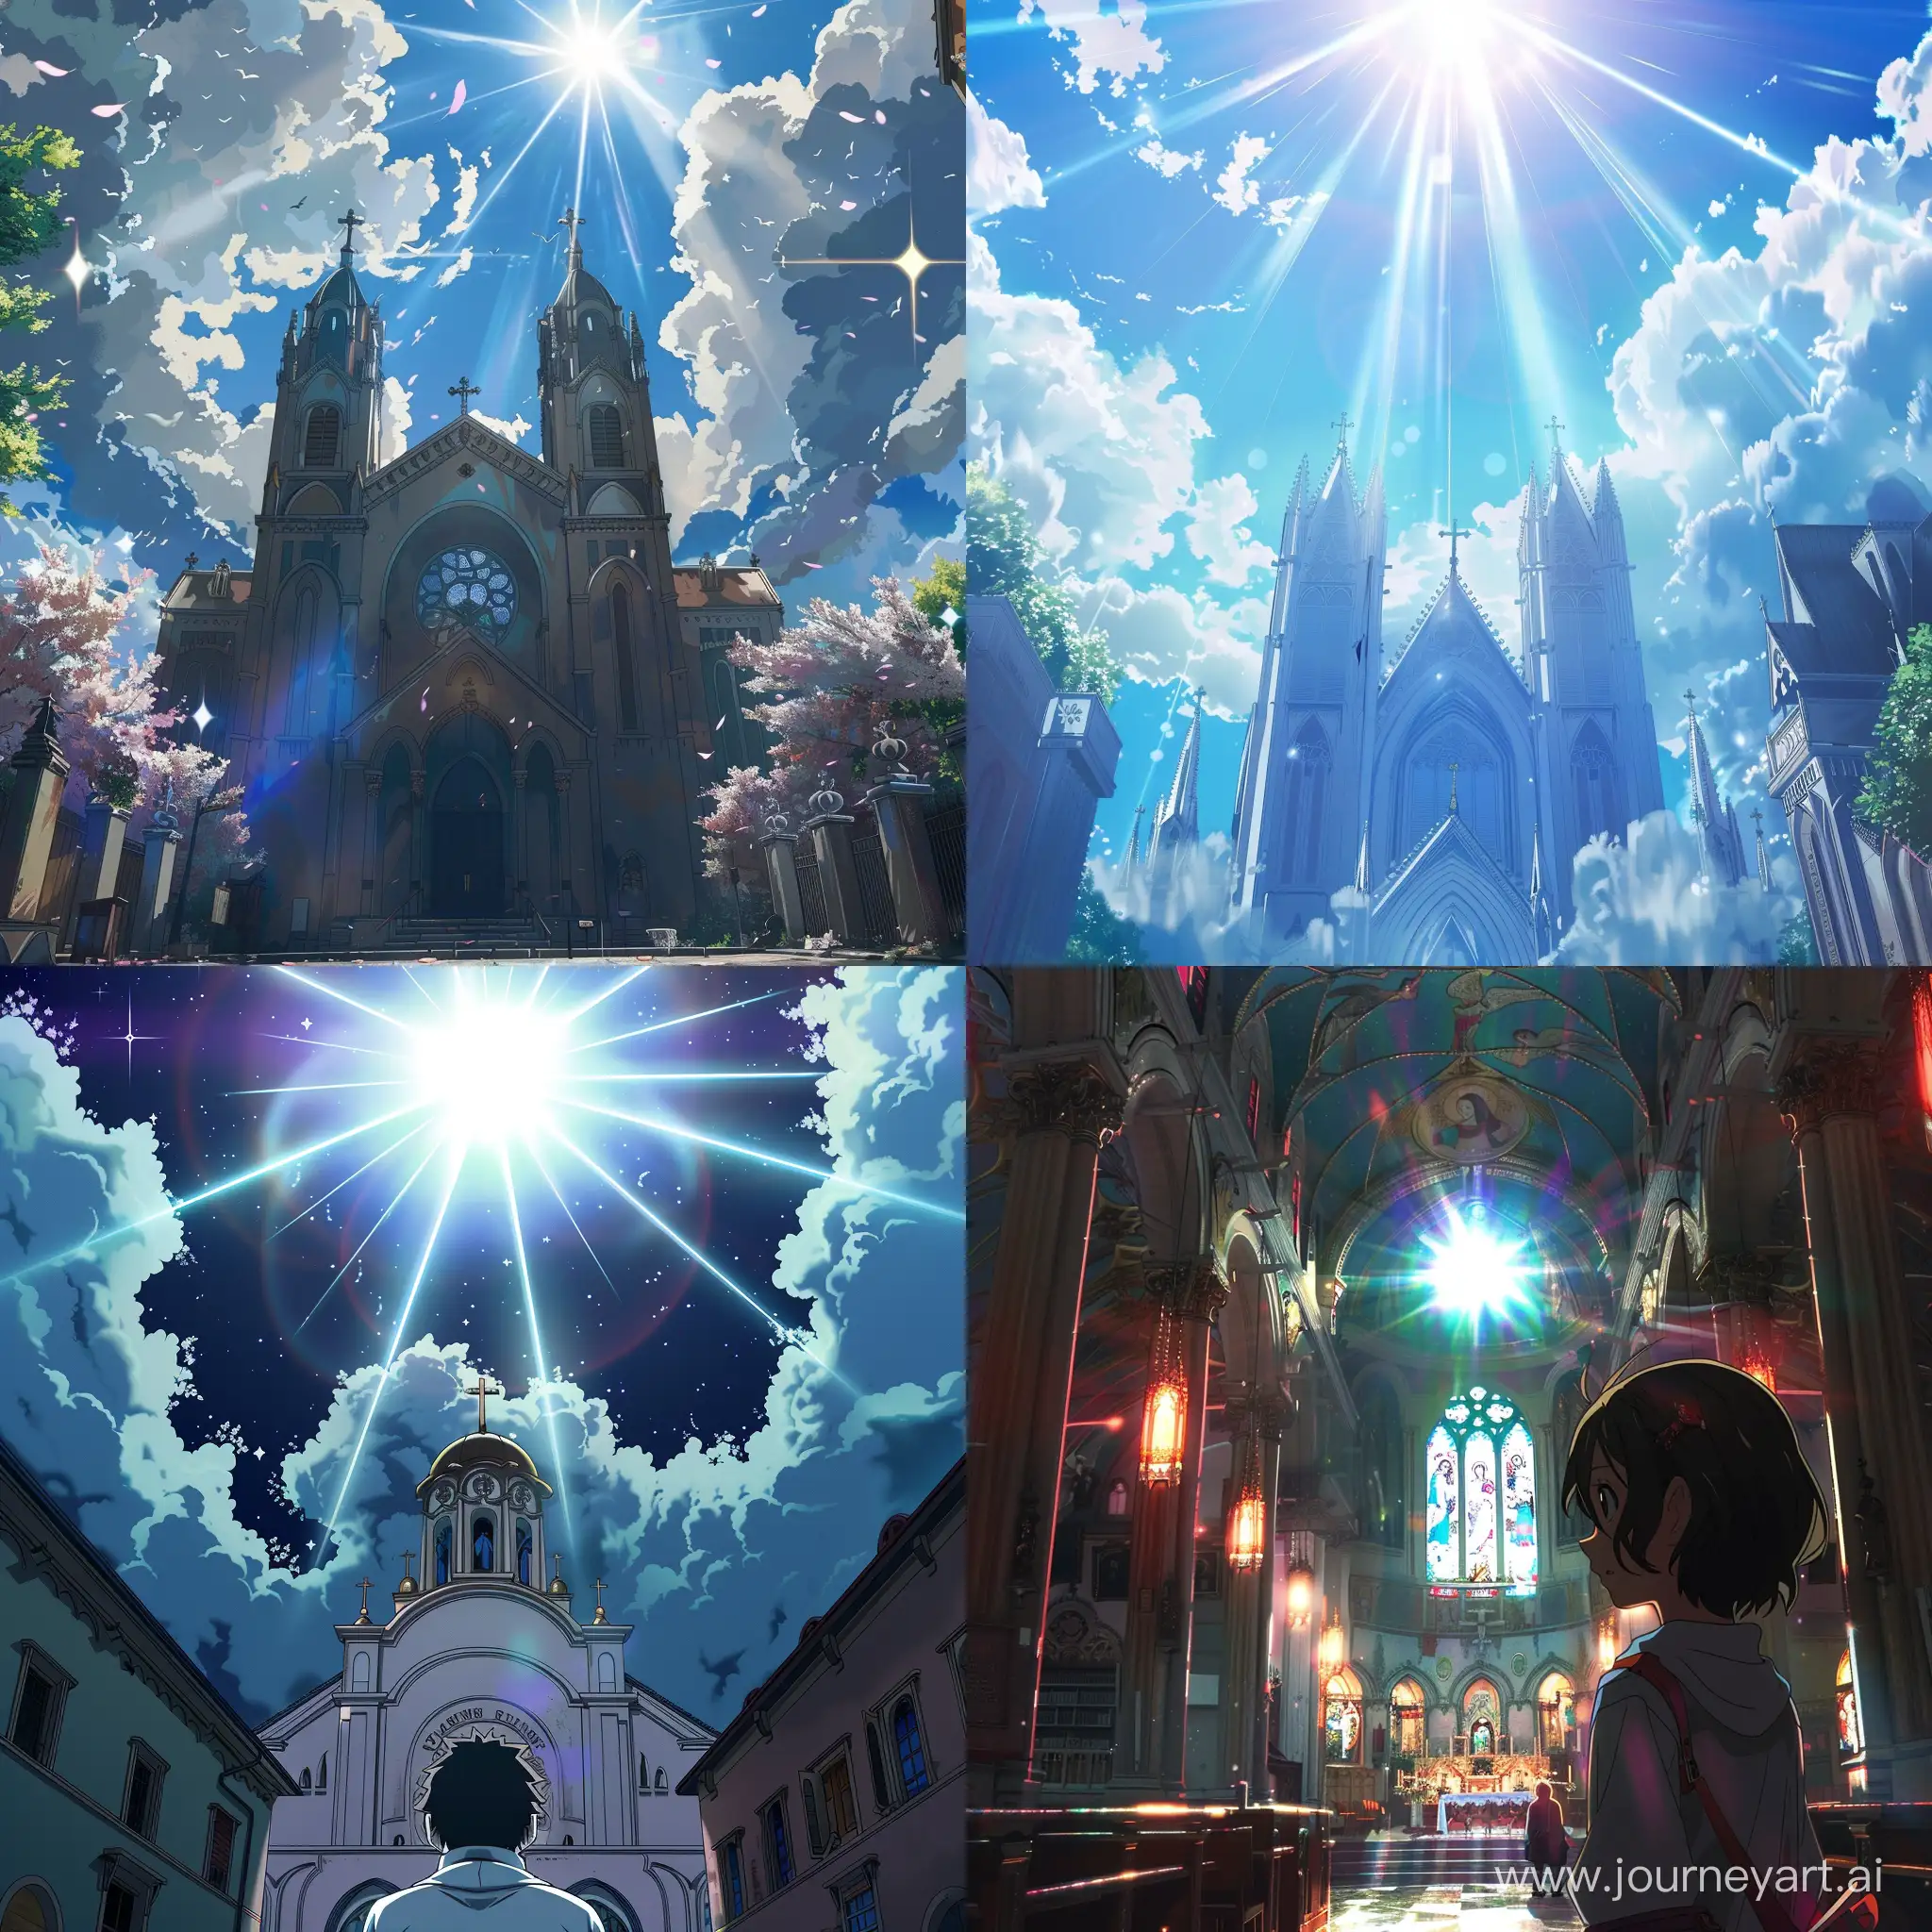 But the bright shine of the churches is becoming more and more blinding.  Anime style